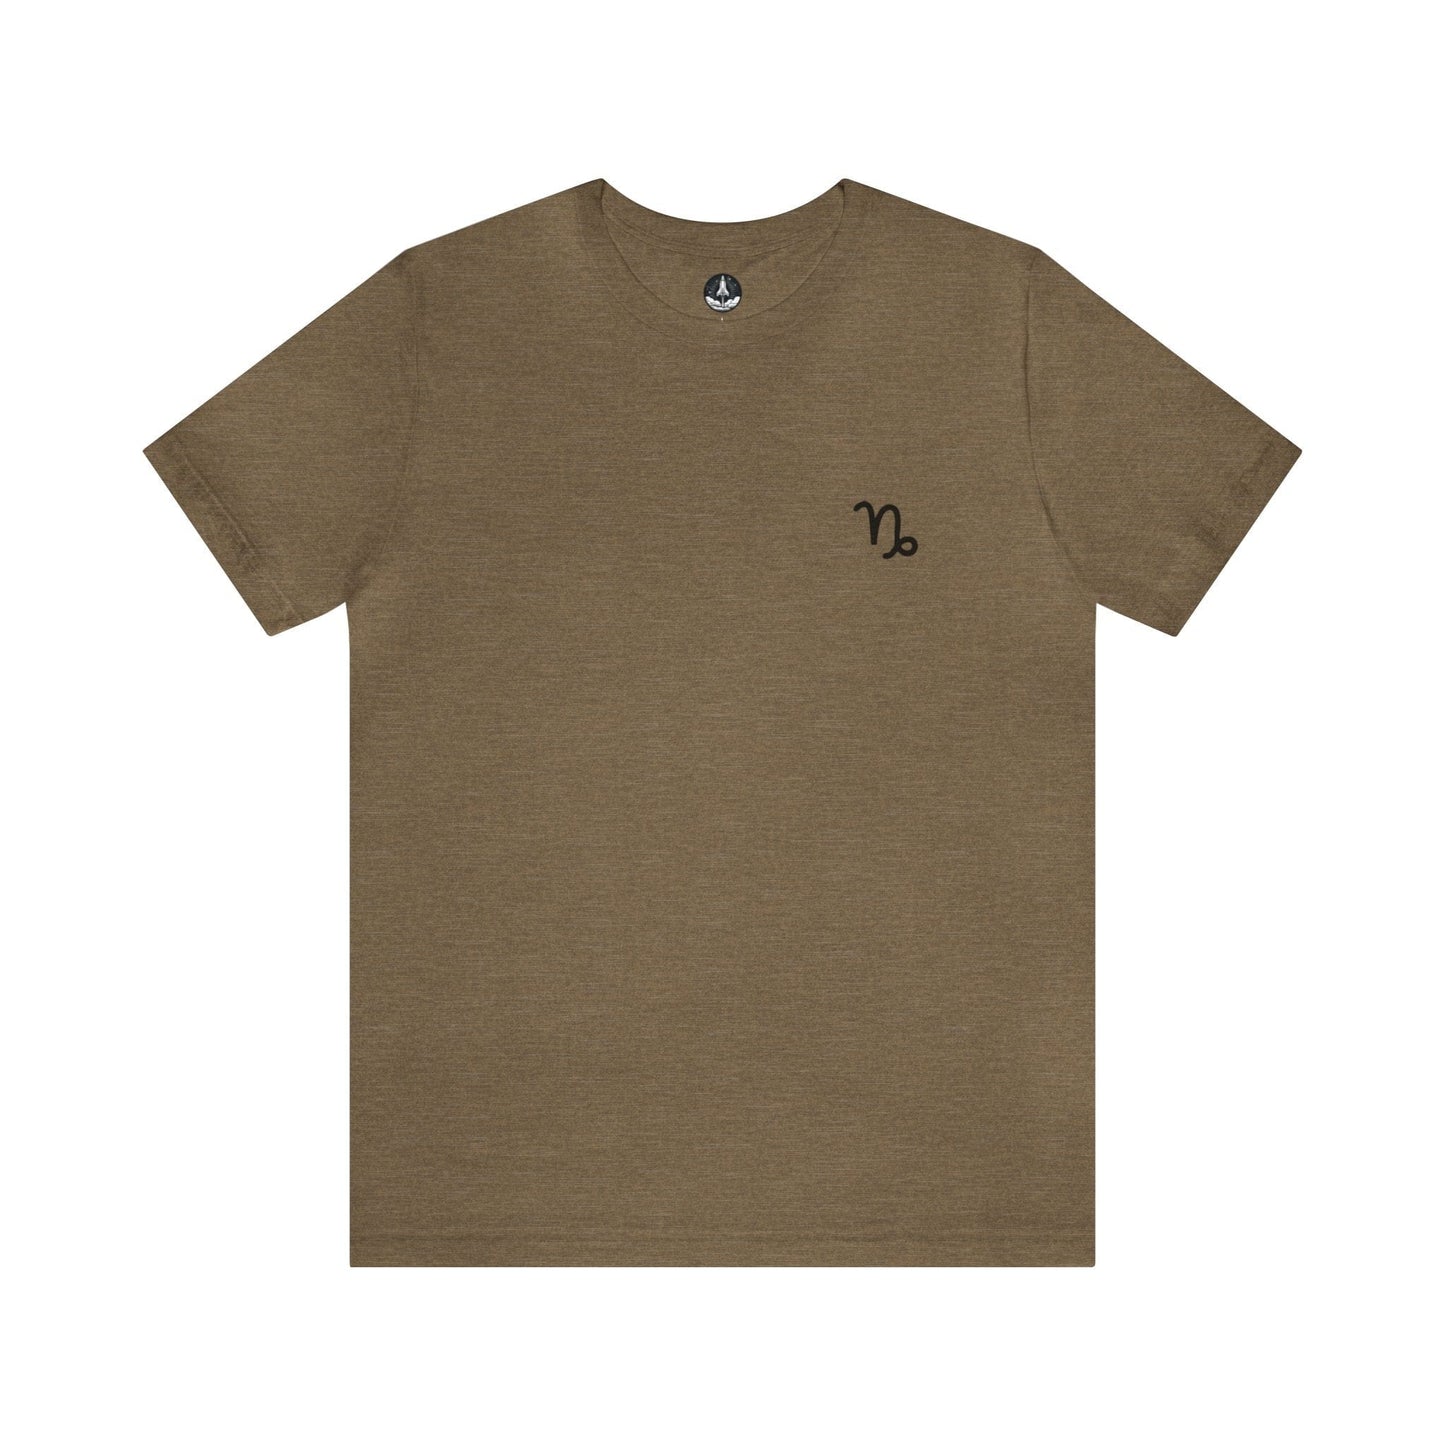 T-Shirt Heather Olive / S Capricorn Mountain Glyph T-Shirt: Peak Style for the Determined Climber